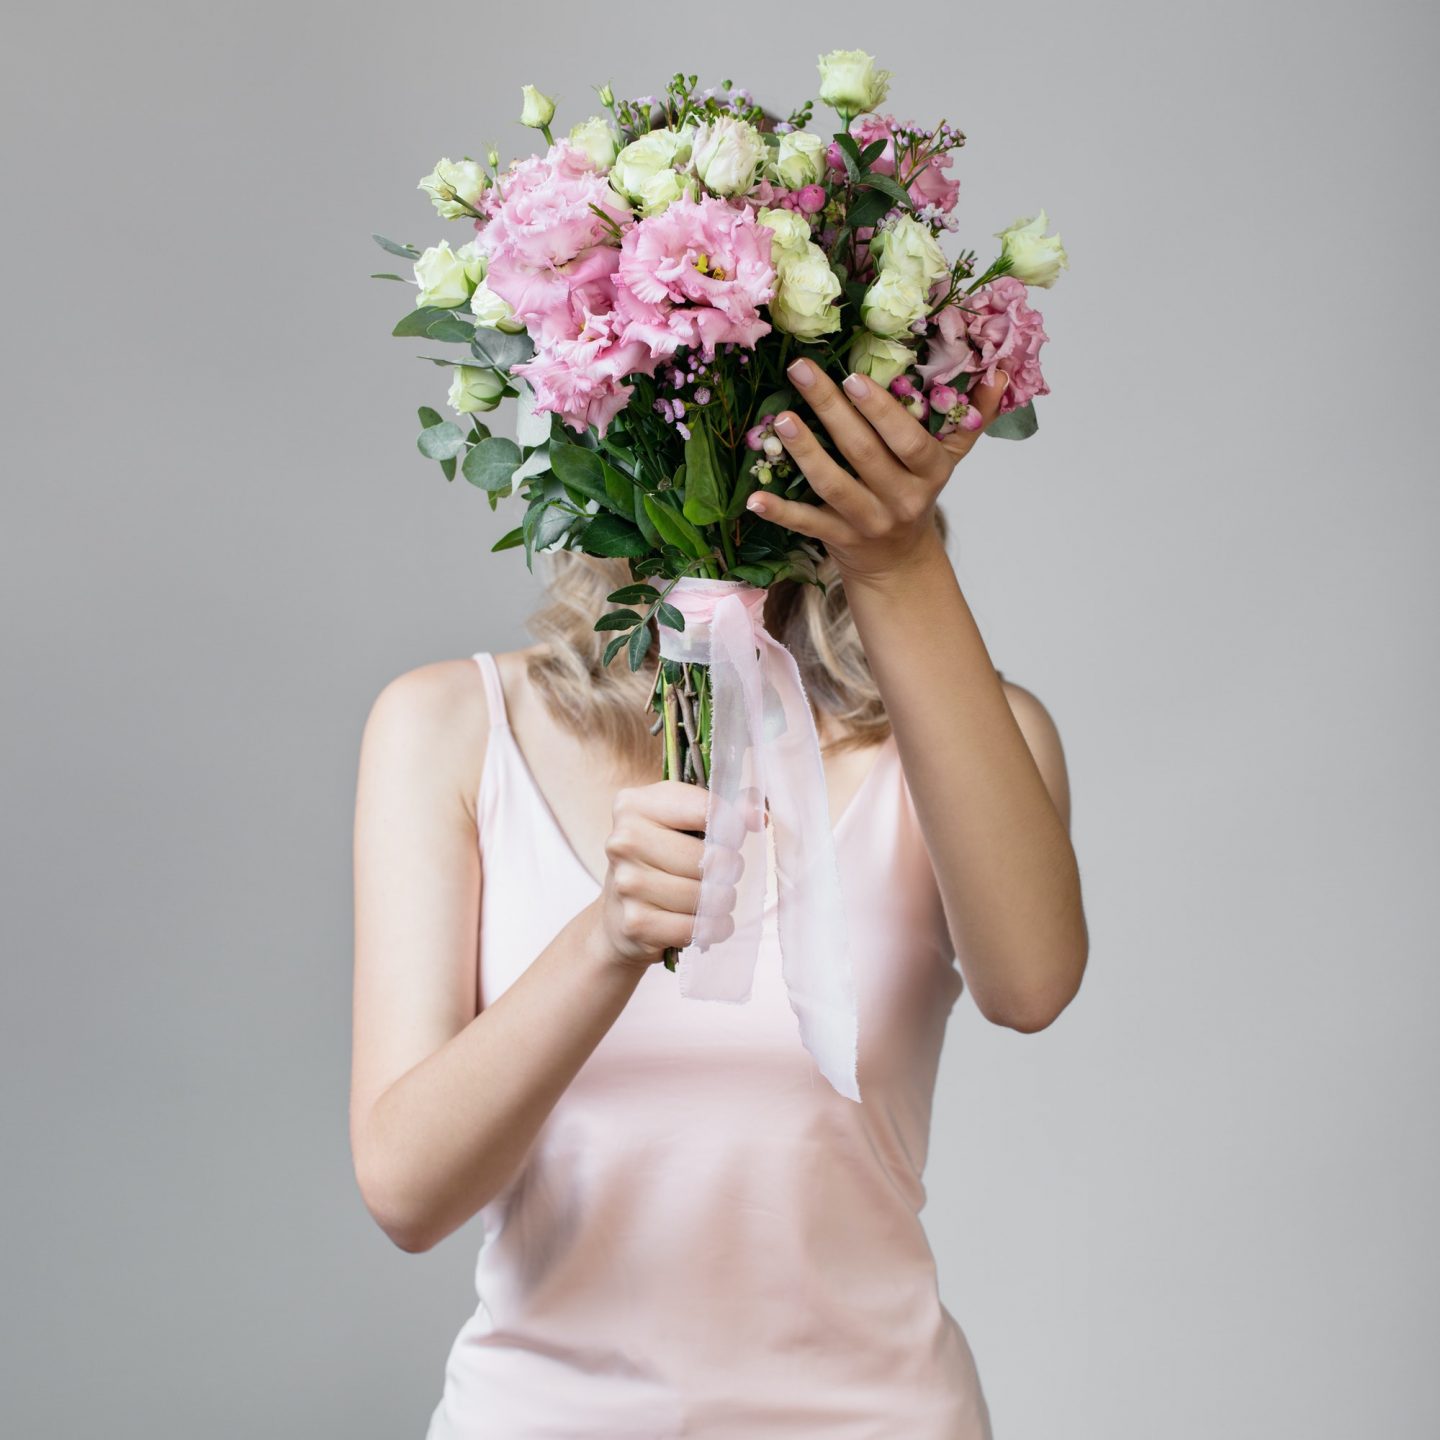 Woman Holding Bouquet In Hands And Hiding Her Face.